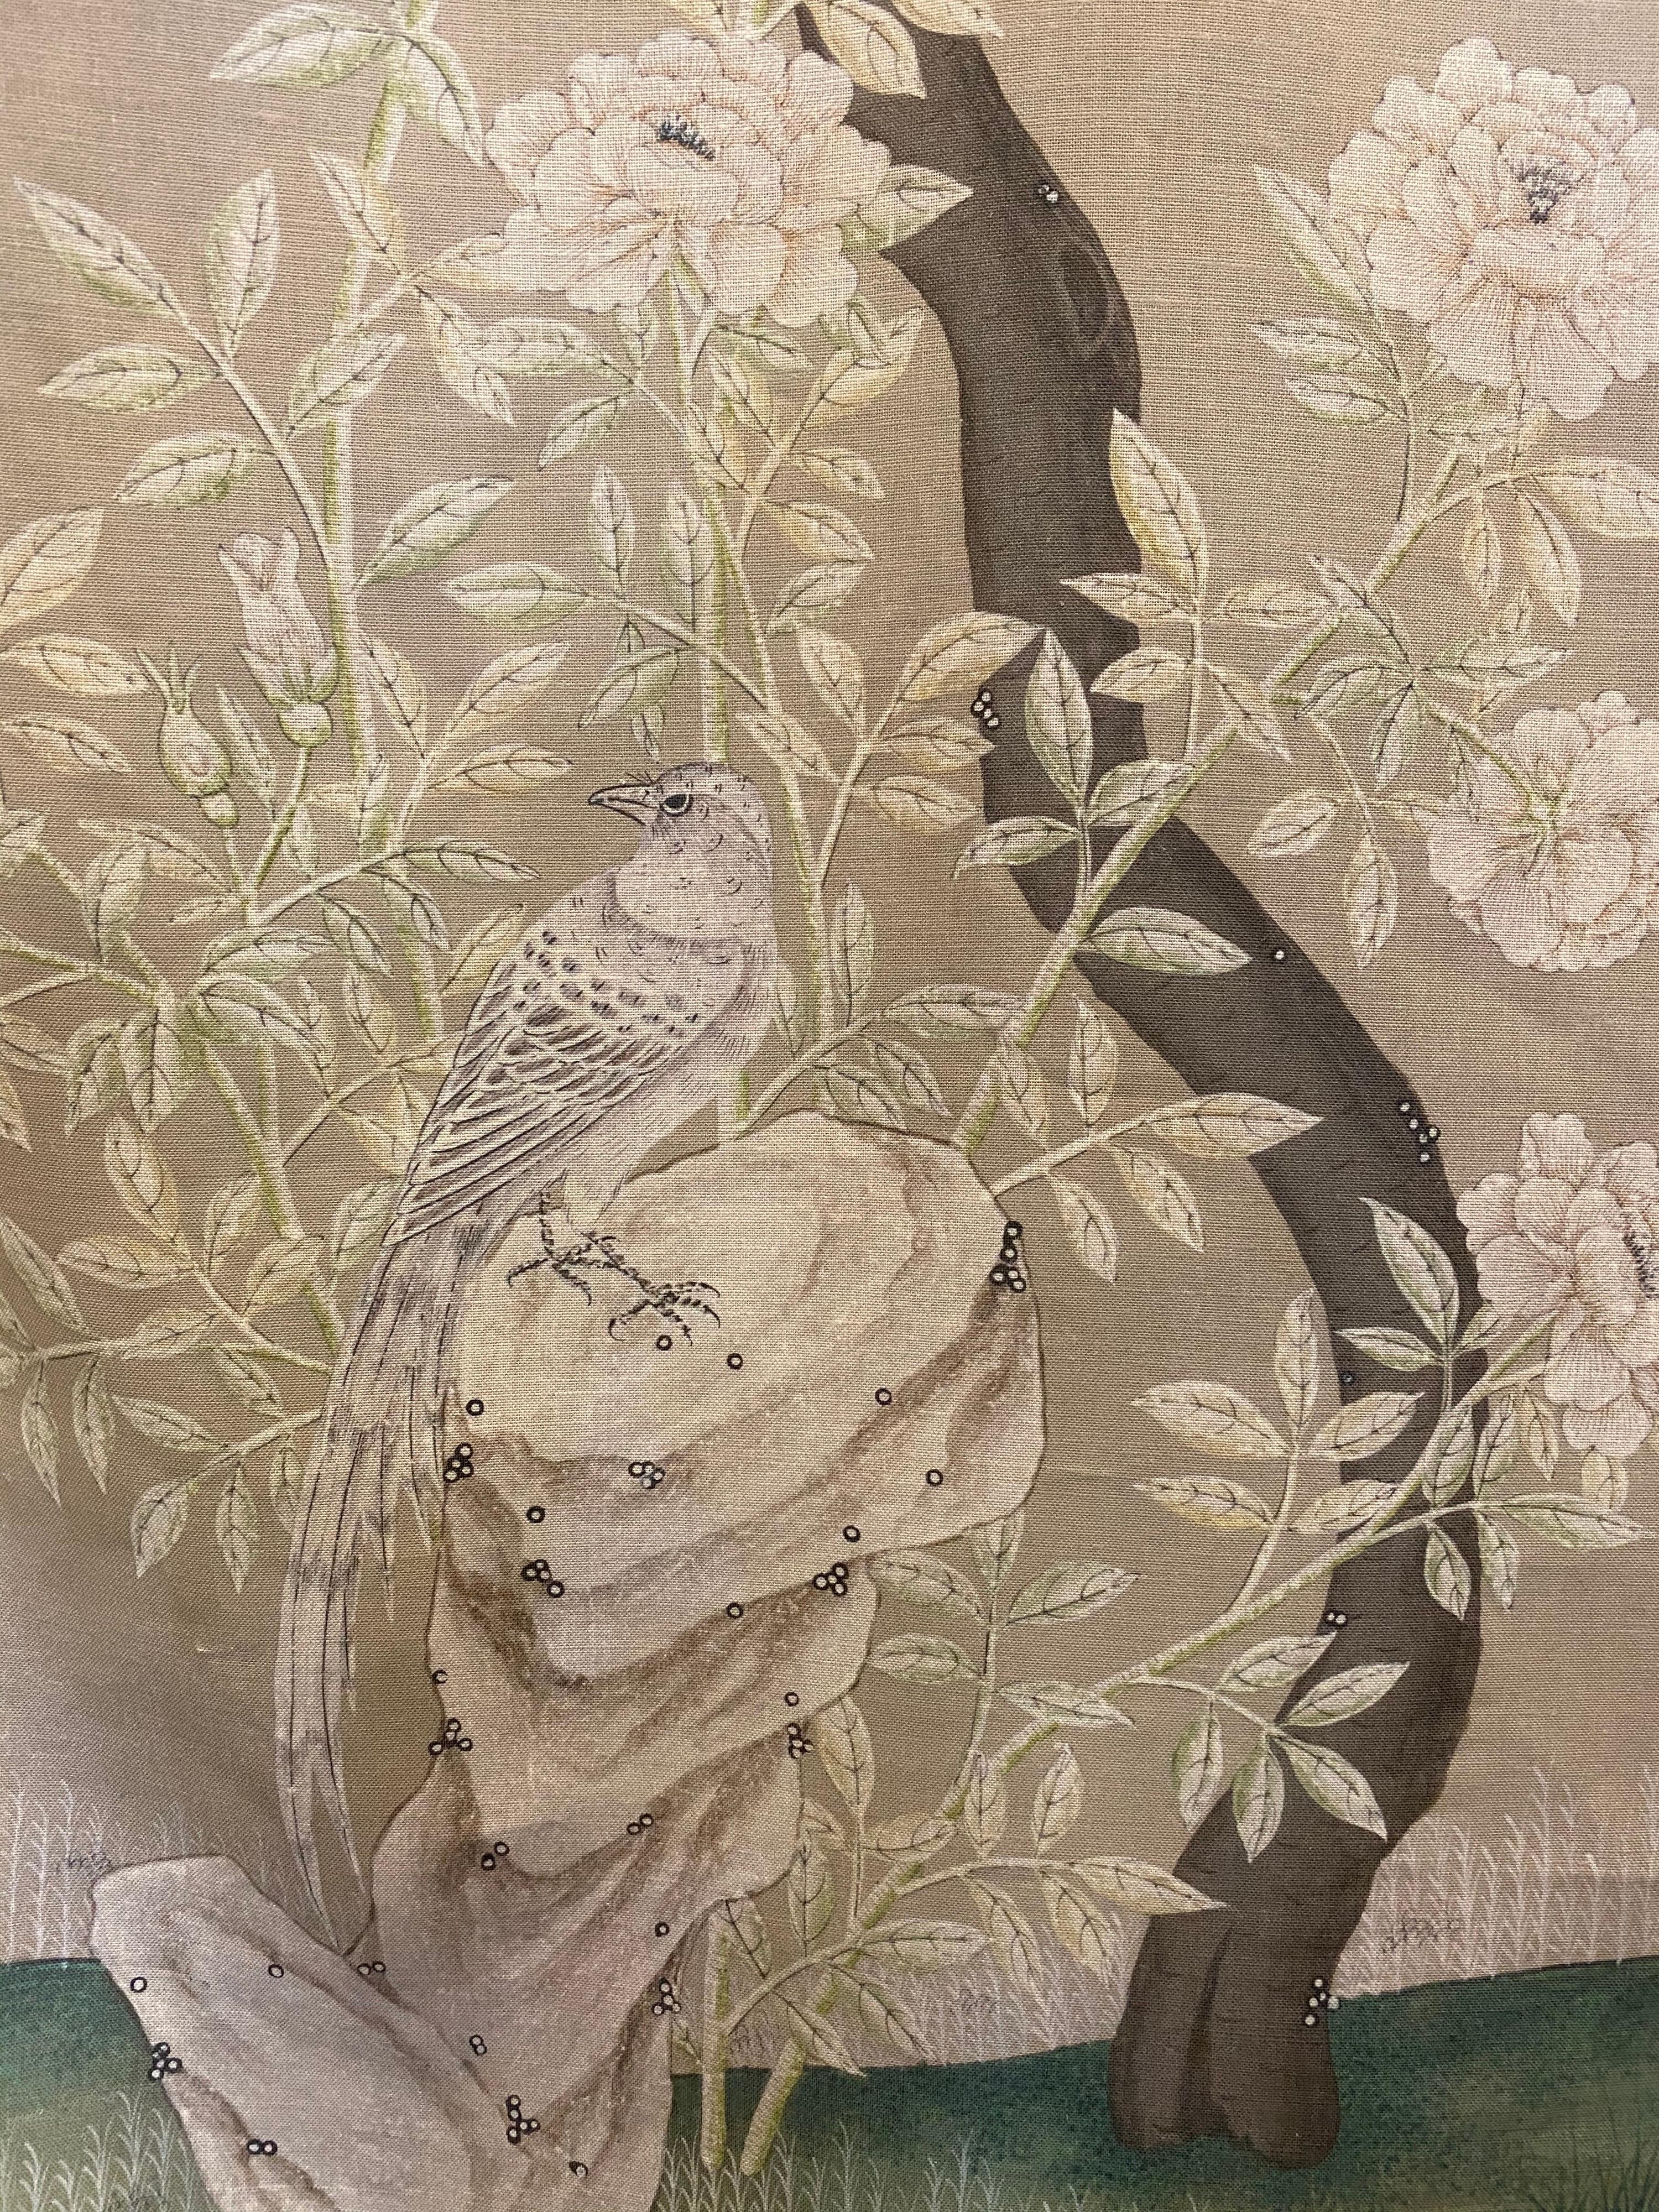 Gracie, the 5th generation firm established in 1898 and known for their exquisite hand painted wallpapers now has a line of linen fabrics featuring six of their iconic patterns.

This is Tan Arbor, with flowering trees, birds, and butterflies on a